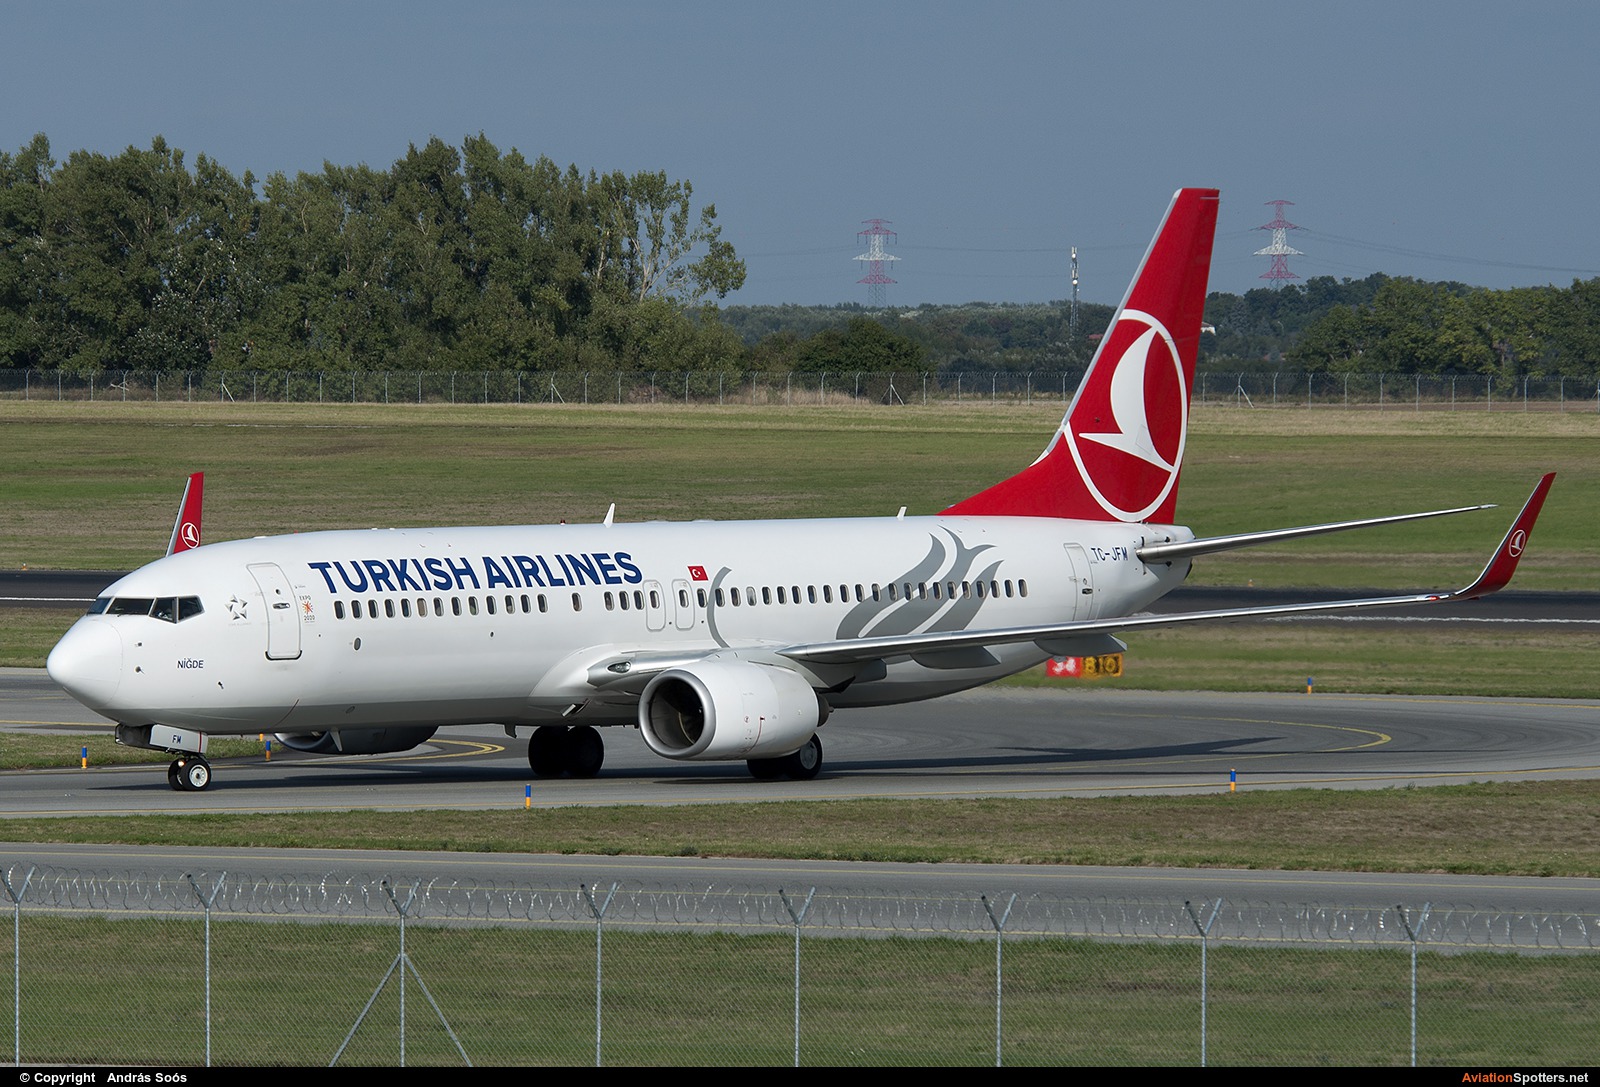 Turkish Airlines  -  737-800  (TC-JFM) By András Soós (sas1965)